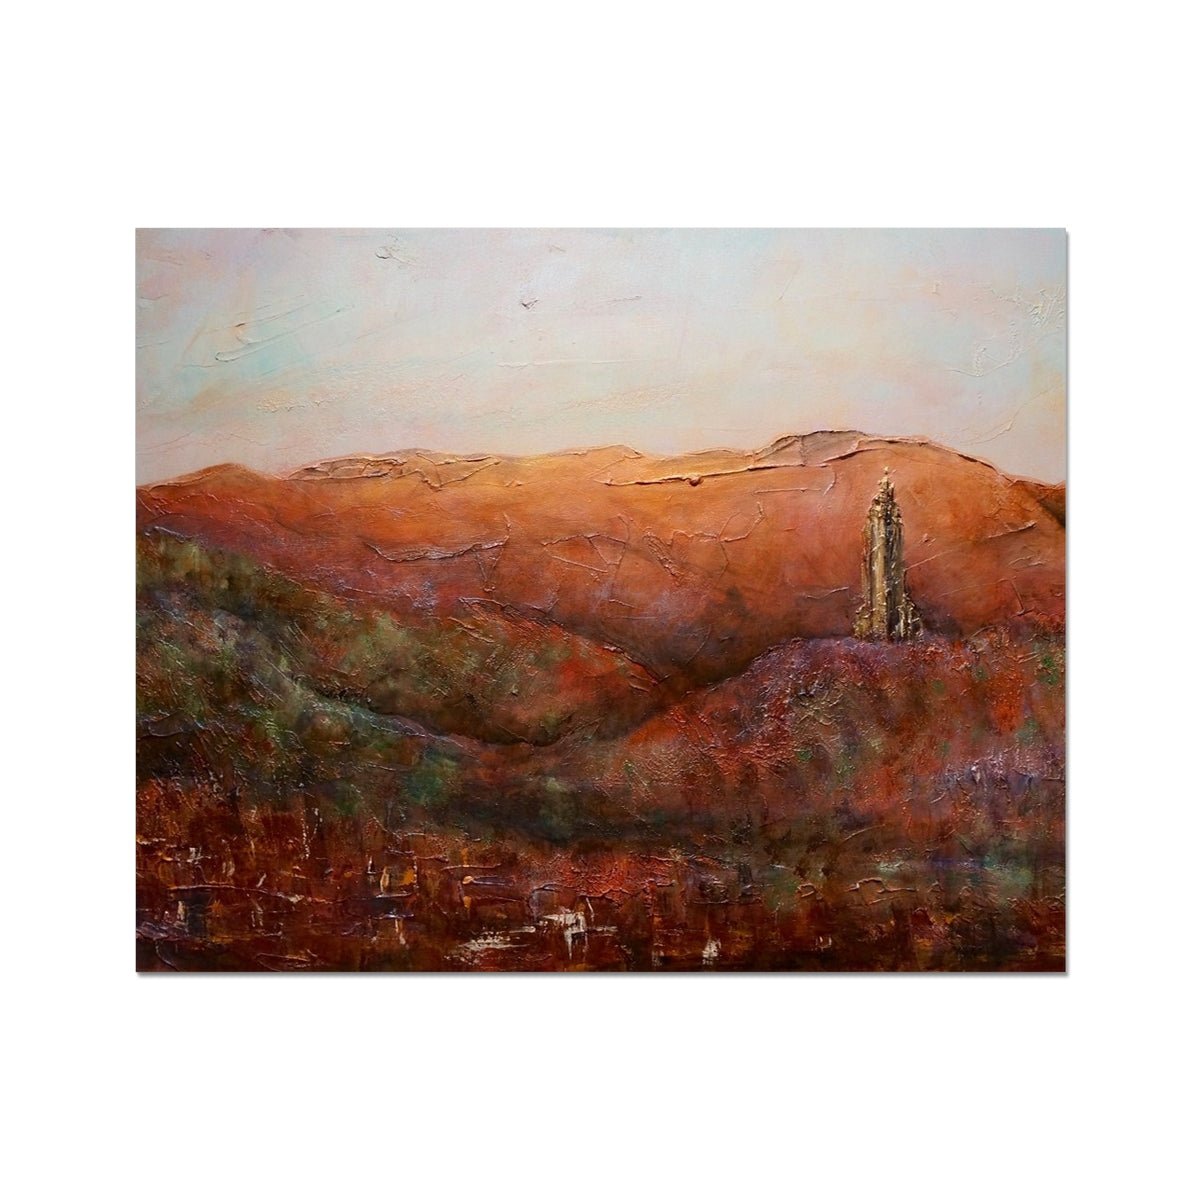 The Wallace Monument Painting | Artist Proof Collector Prints From Scotland-Artist Proof Collector Prints-Historic & Iconic Scotland Art Gallery-20"x16"-Paintings, Prints, Homeware, Art Gifts From Scotland By Scottish Artist Kevin Hunter